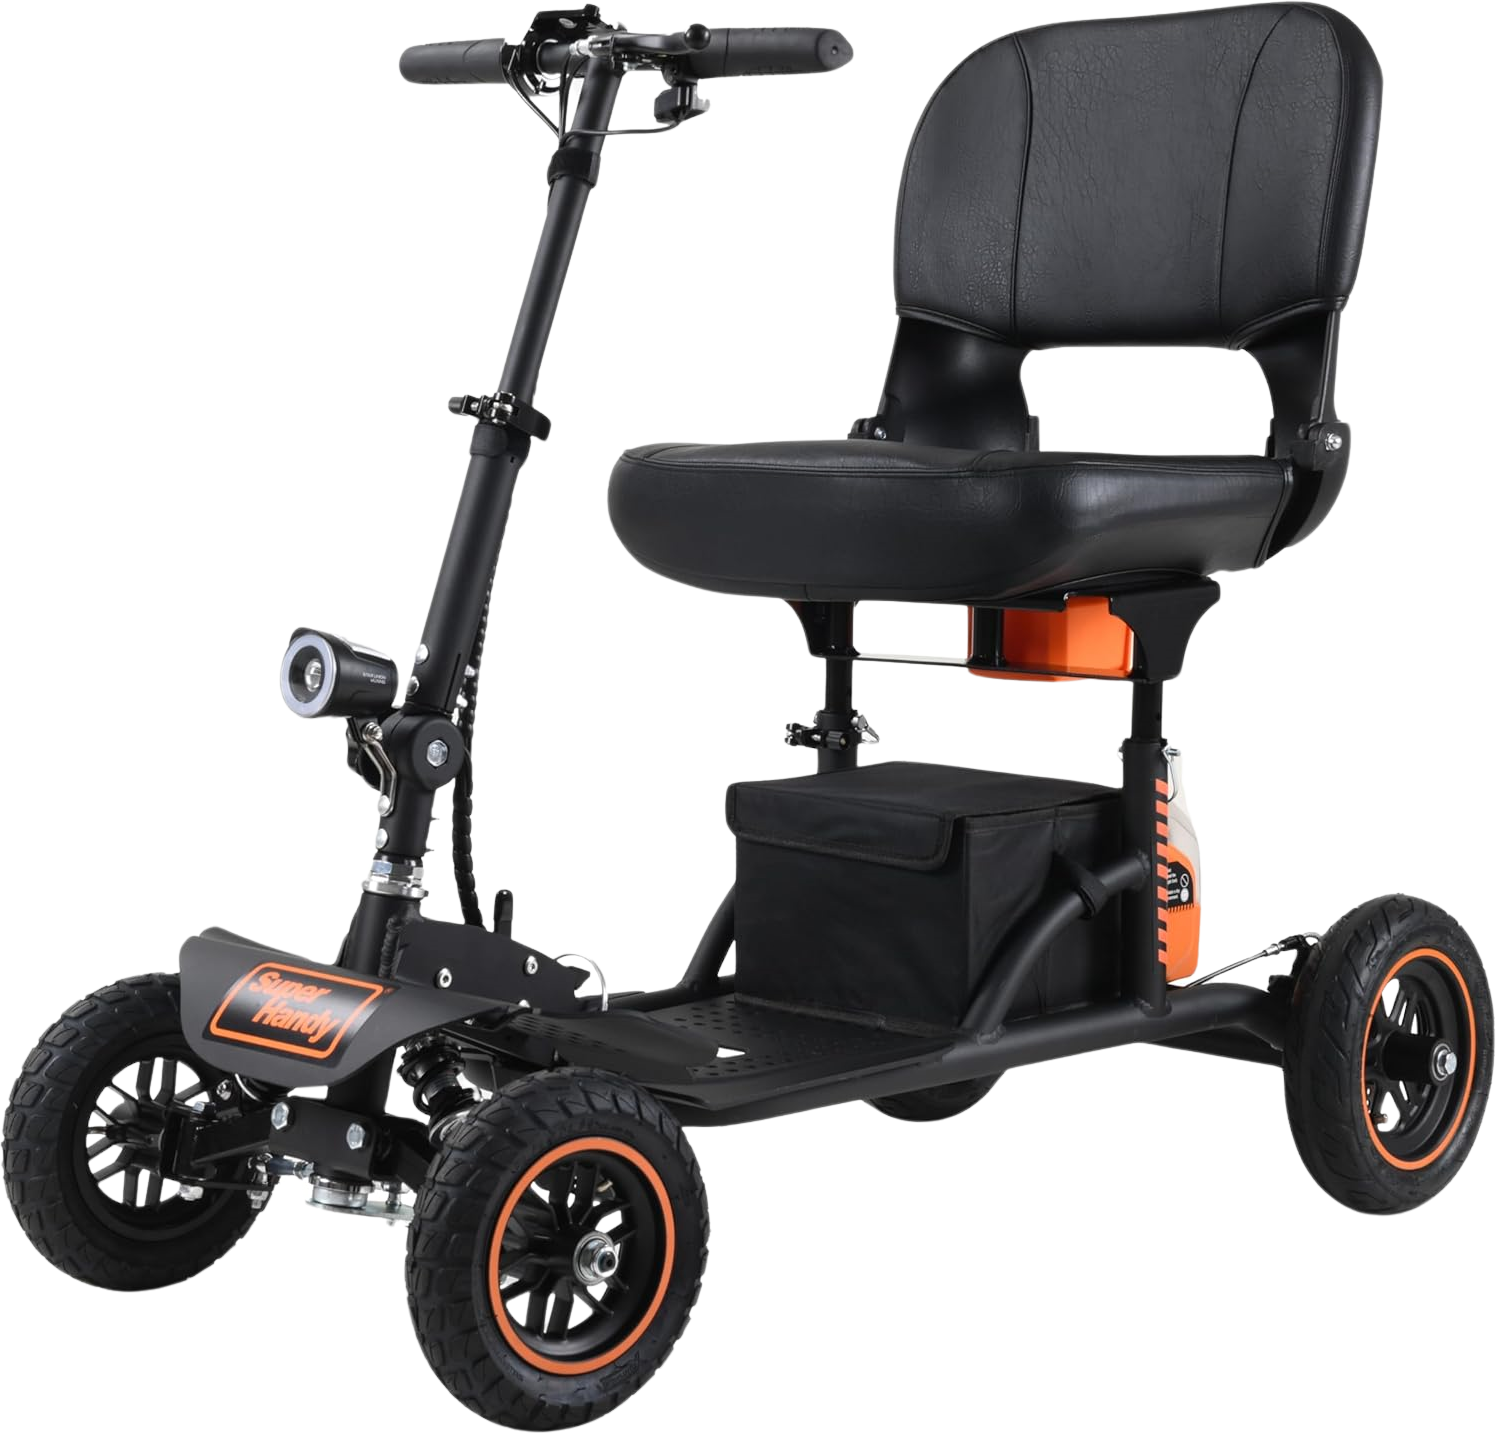 Super Handy, Super Handy GUT161 Electric Mobility Scooter Pro All Terrain 48V 2Ah 500W 6.25 MPH Max Speed 12.5 Mile Range New